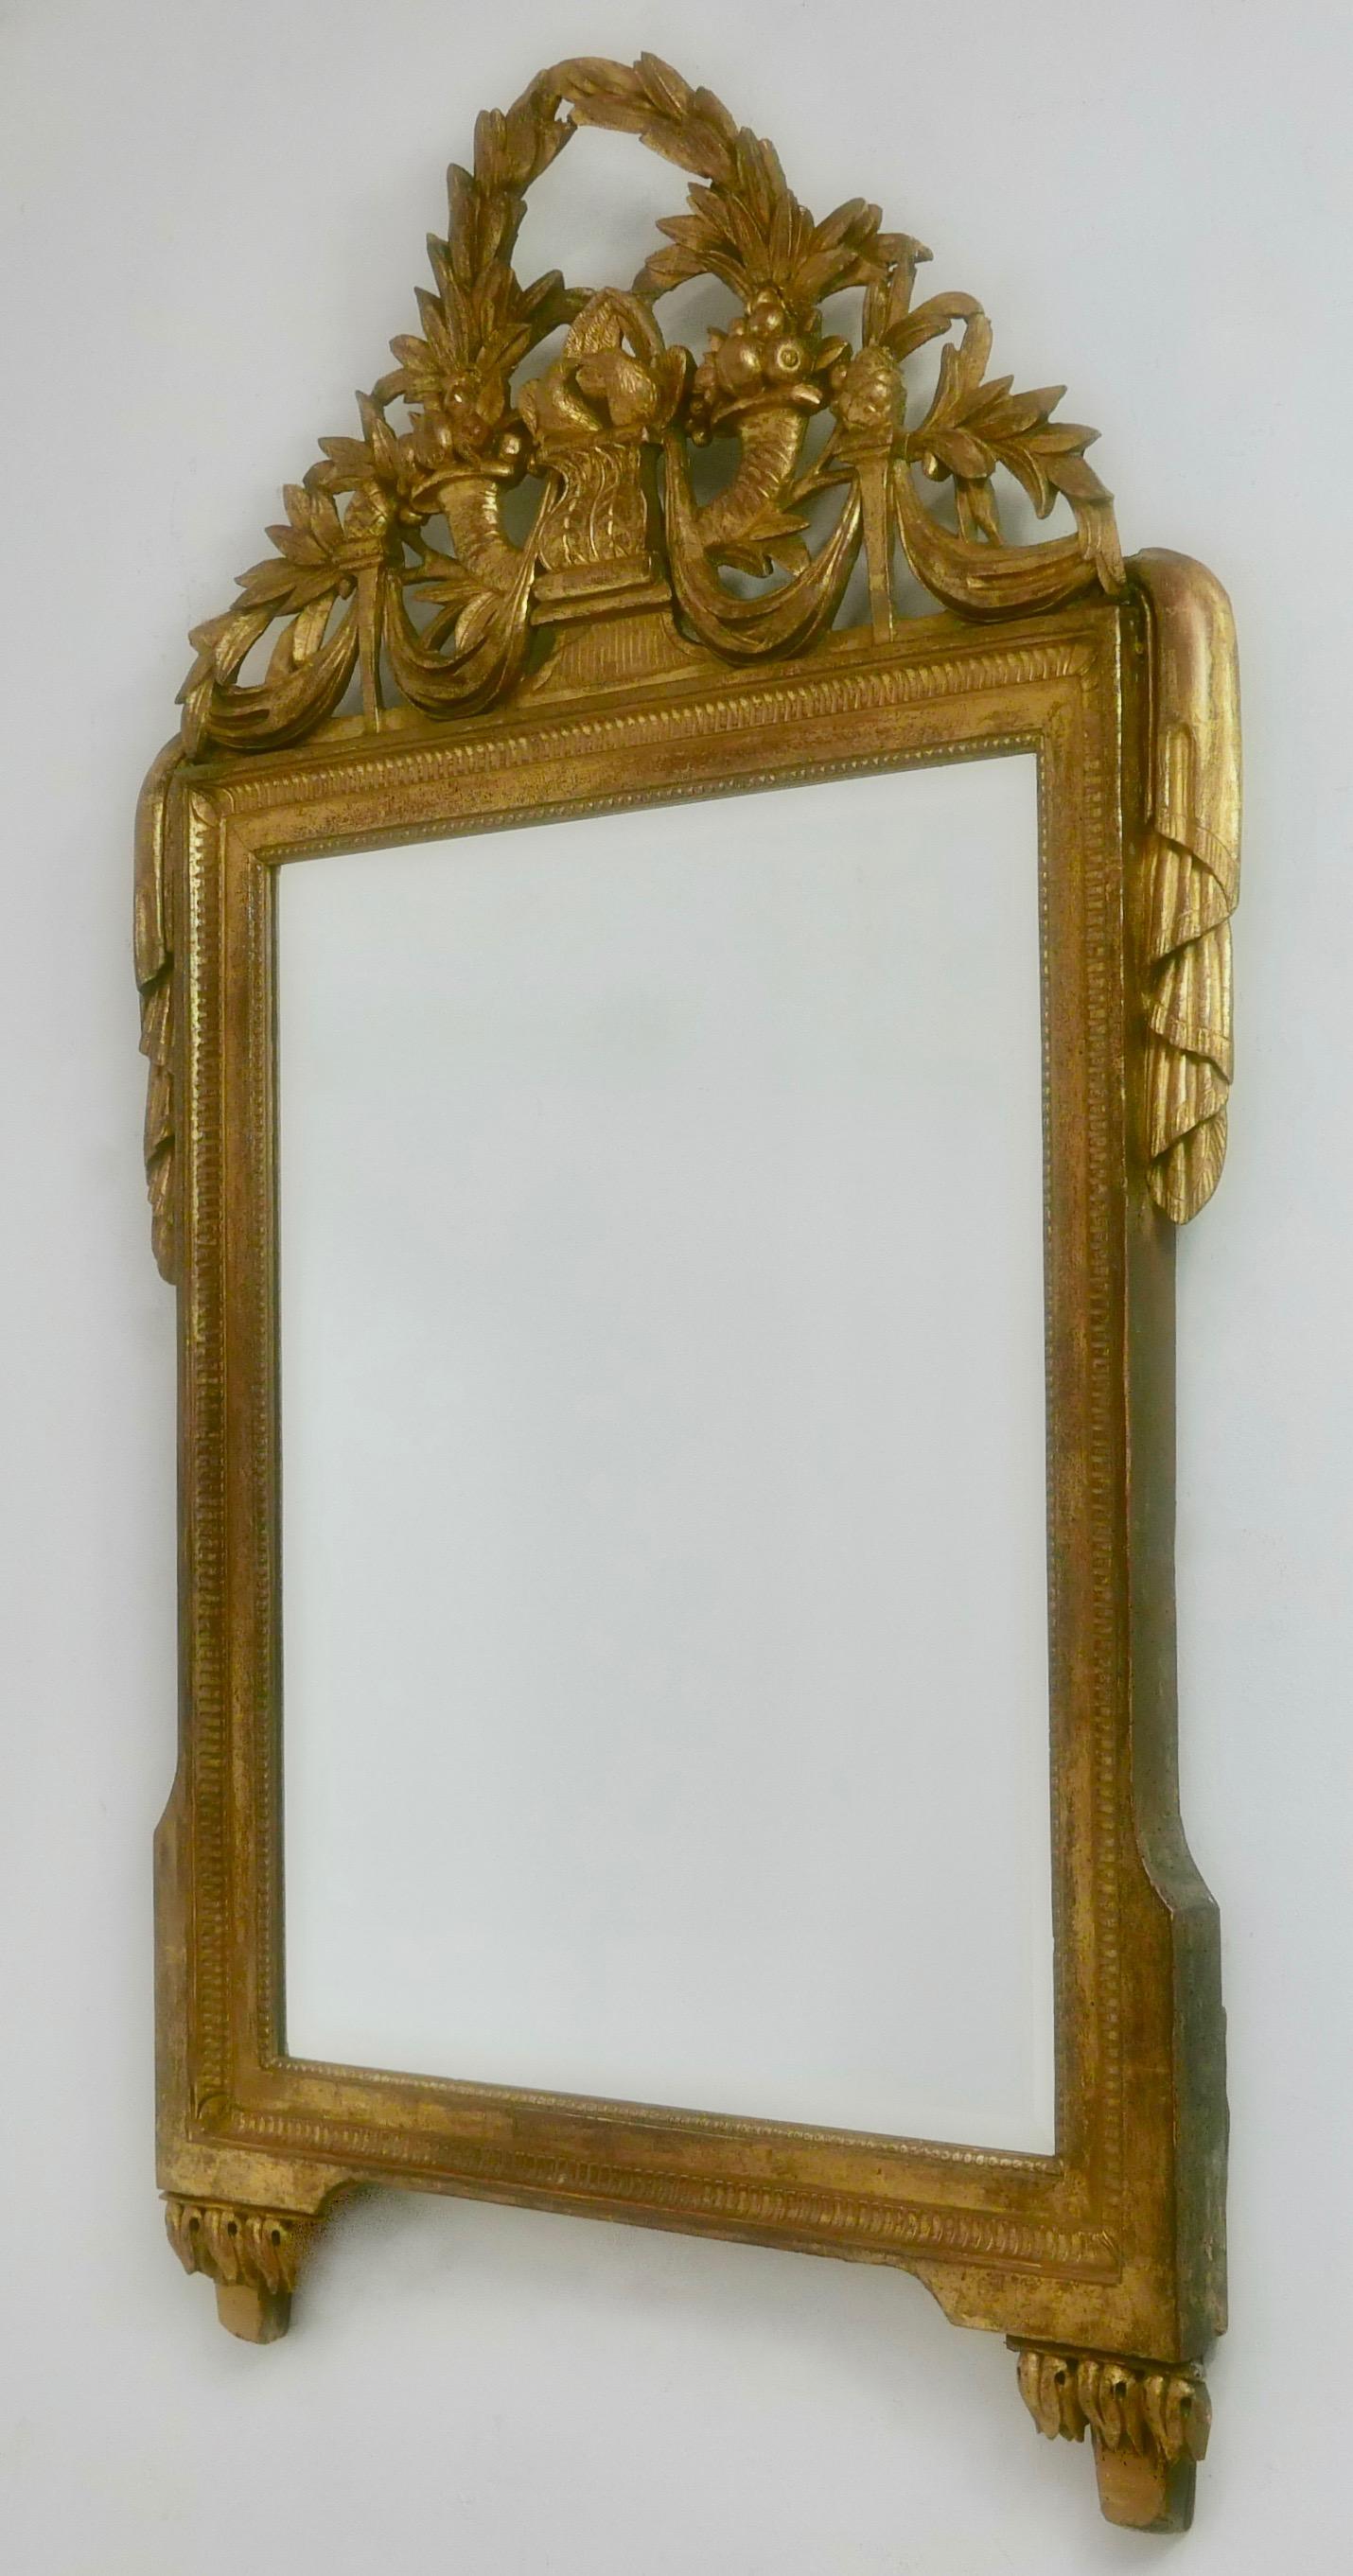 A handsome and well proportioned carved and gilded wood framed Louis XVI mirror, having its original gilding that is beautifully aged. The intricately carved curved and pierced crown has a laurel wreath, cornucopias and a pair of kissing doves